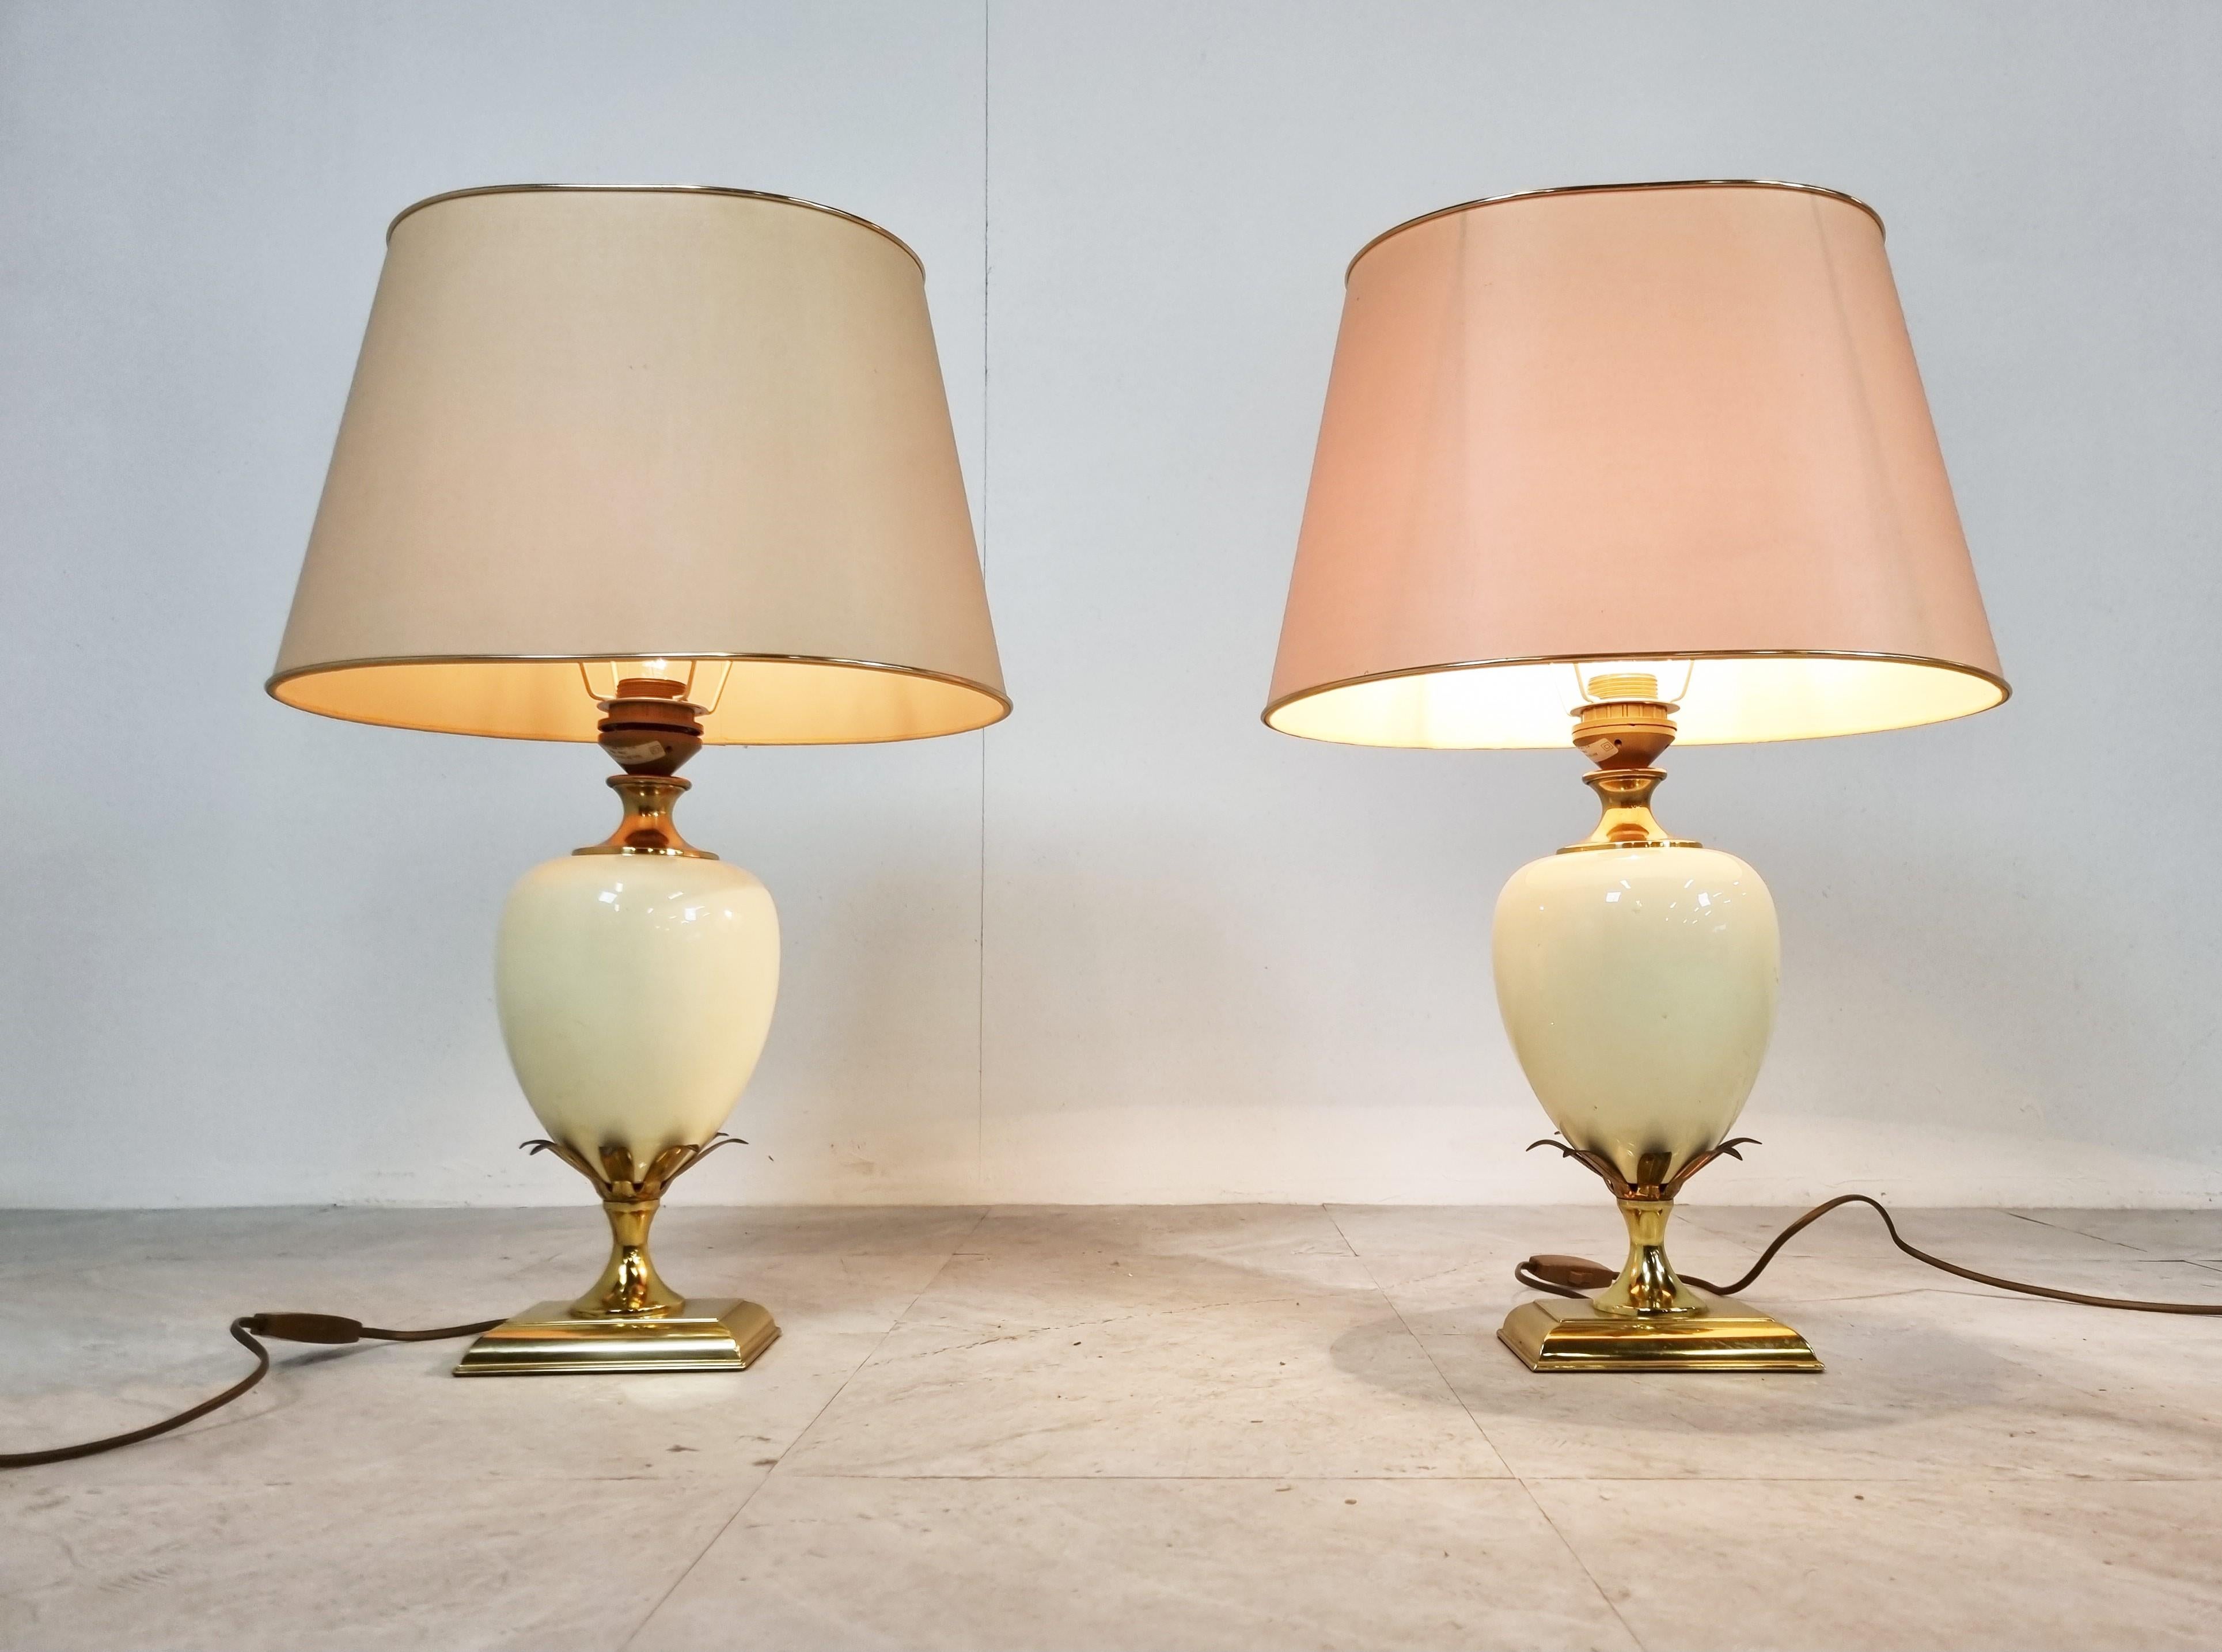 French Pair of Vintage Pineapple Table Lamps by Maison Le Dauphin, 1970s